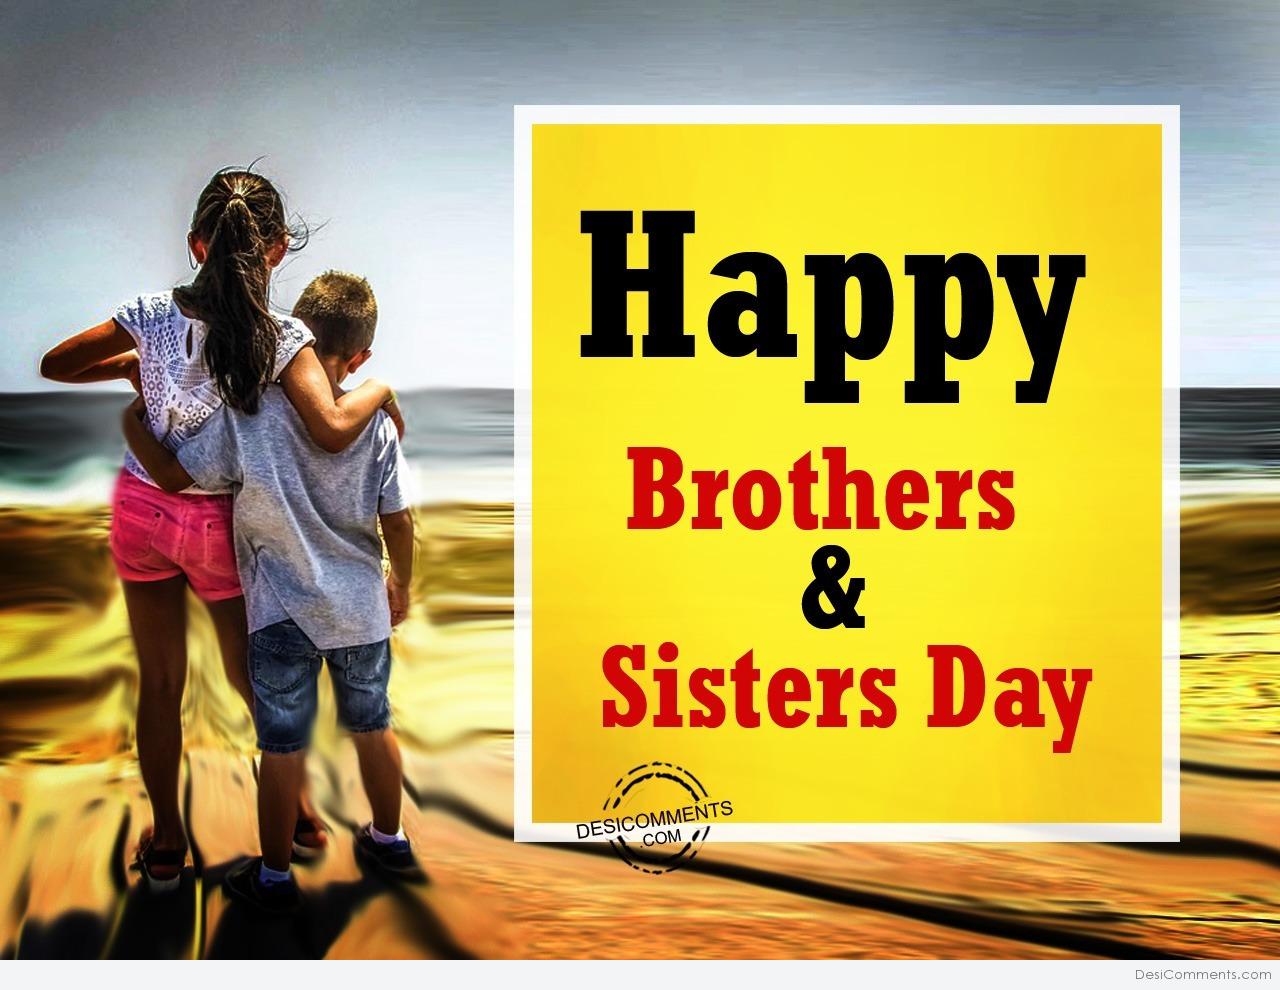 Happy brothers & Sisters Day,May 2 - DesiComments.com